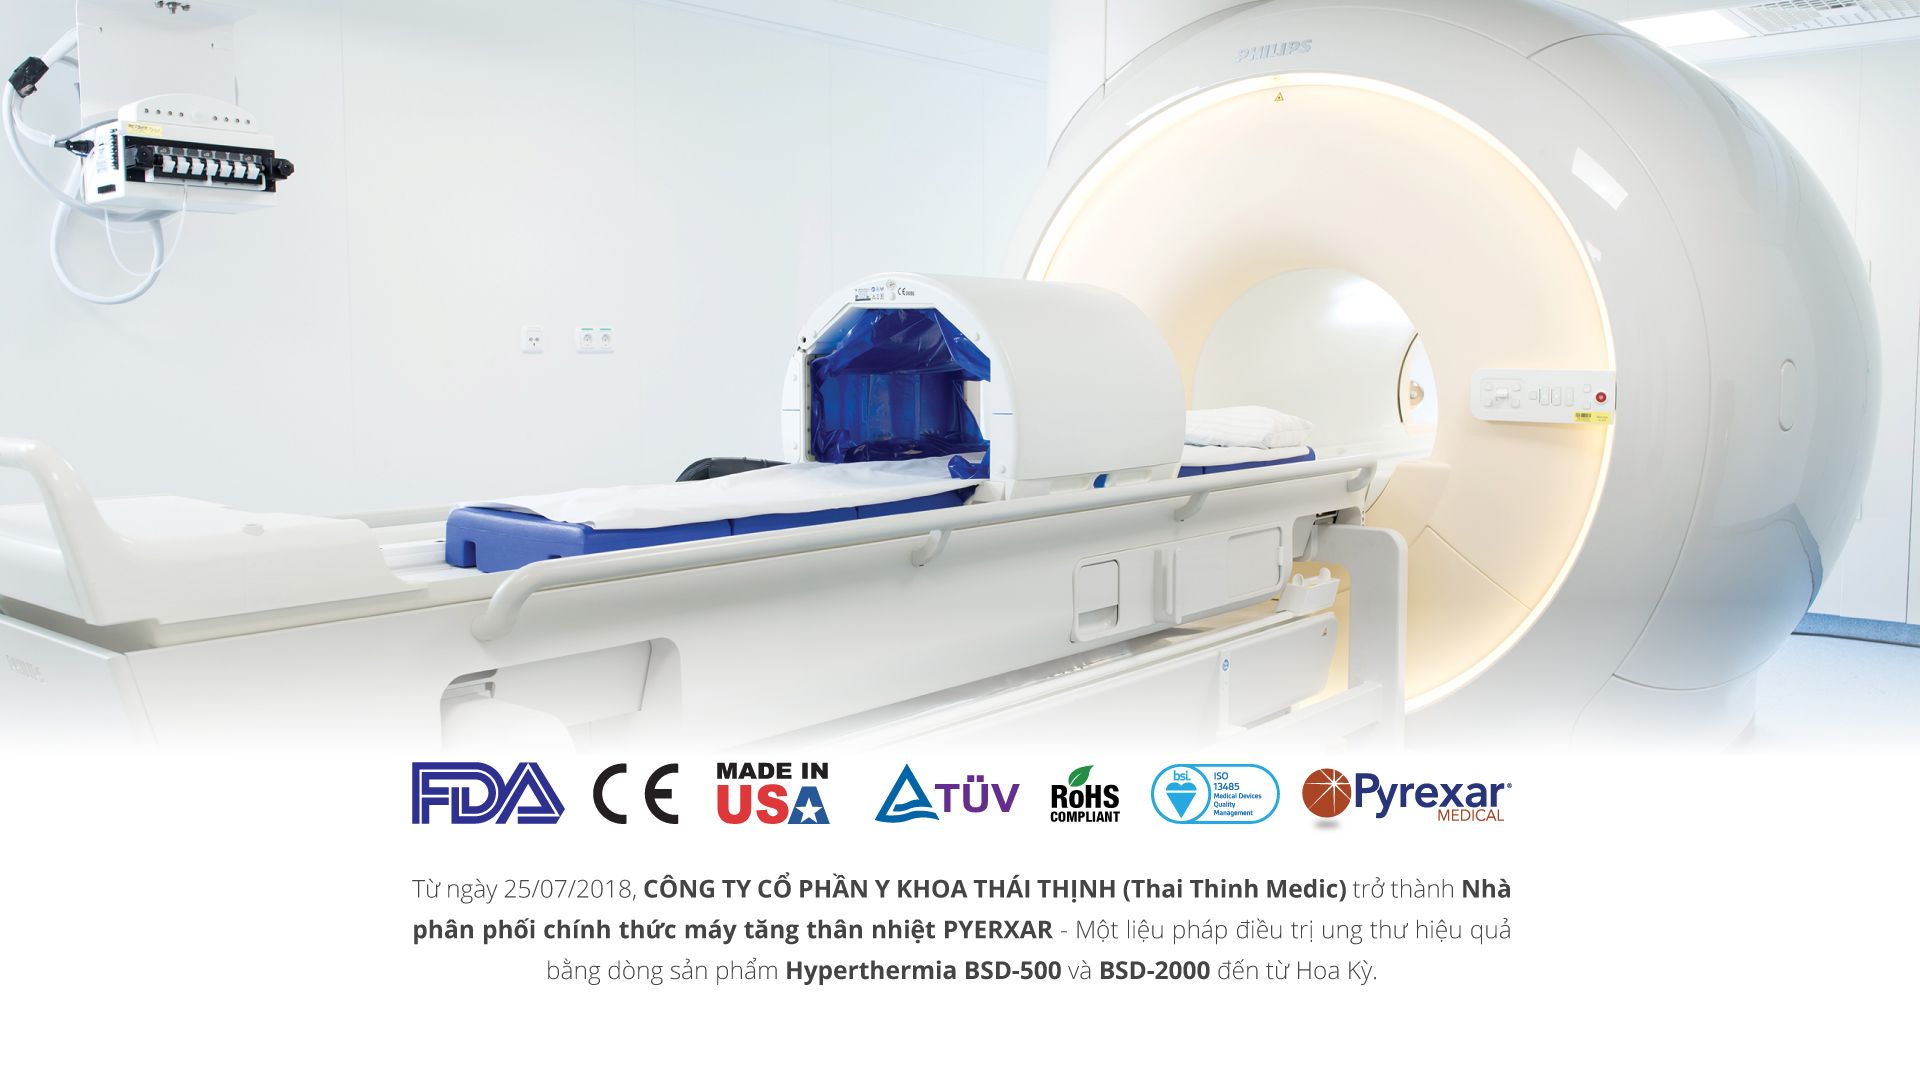 The BSD-2000 3D/MR employs the next generation of non-invasive thermometry.  MR images are translated to map and visualize temperature, allowing  for precision placement of the hyperthermic heating zone.